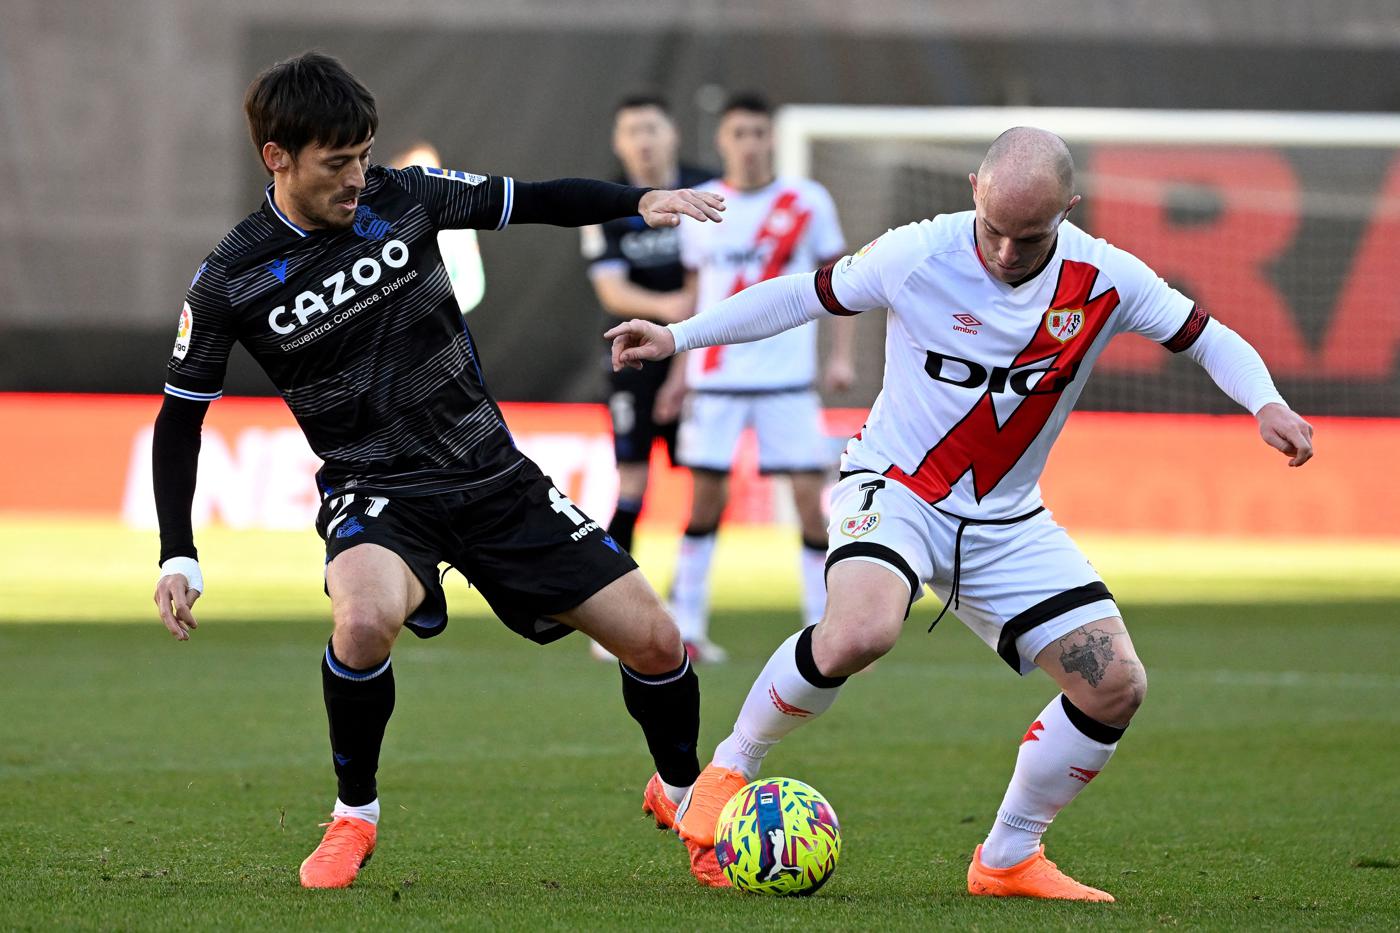 Real C-Dad - Rayo Vallecano - 2-1. Spain Championship, 30th round. Match review, statistics.